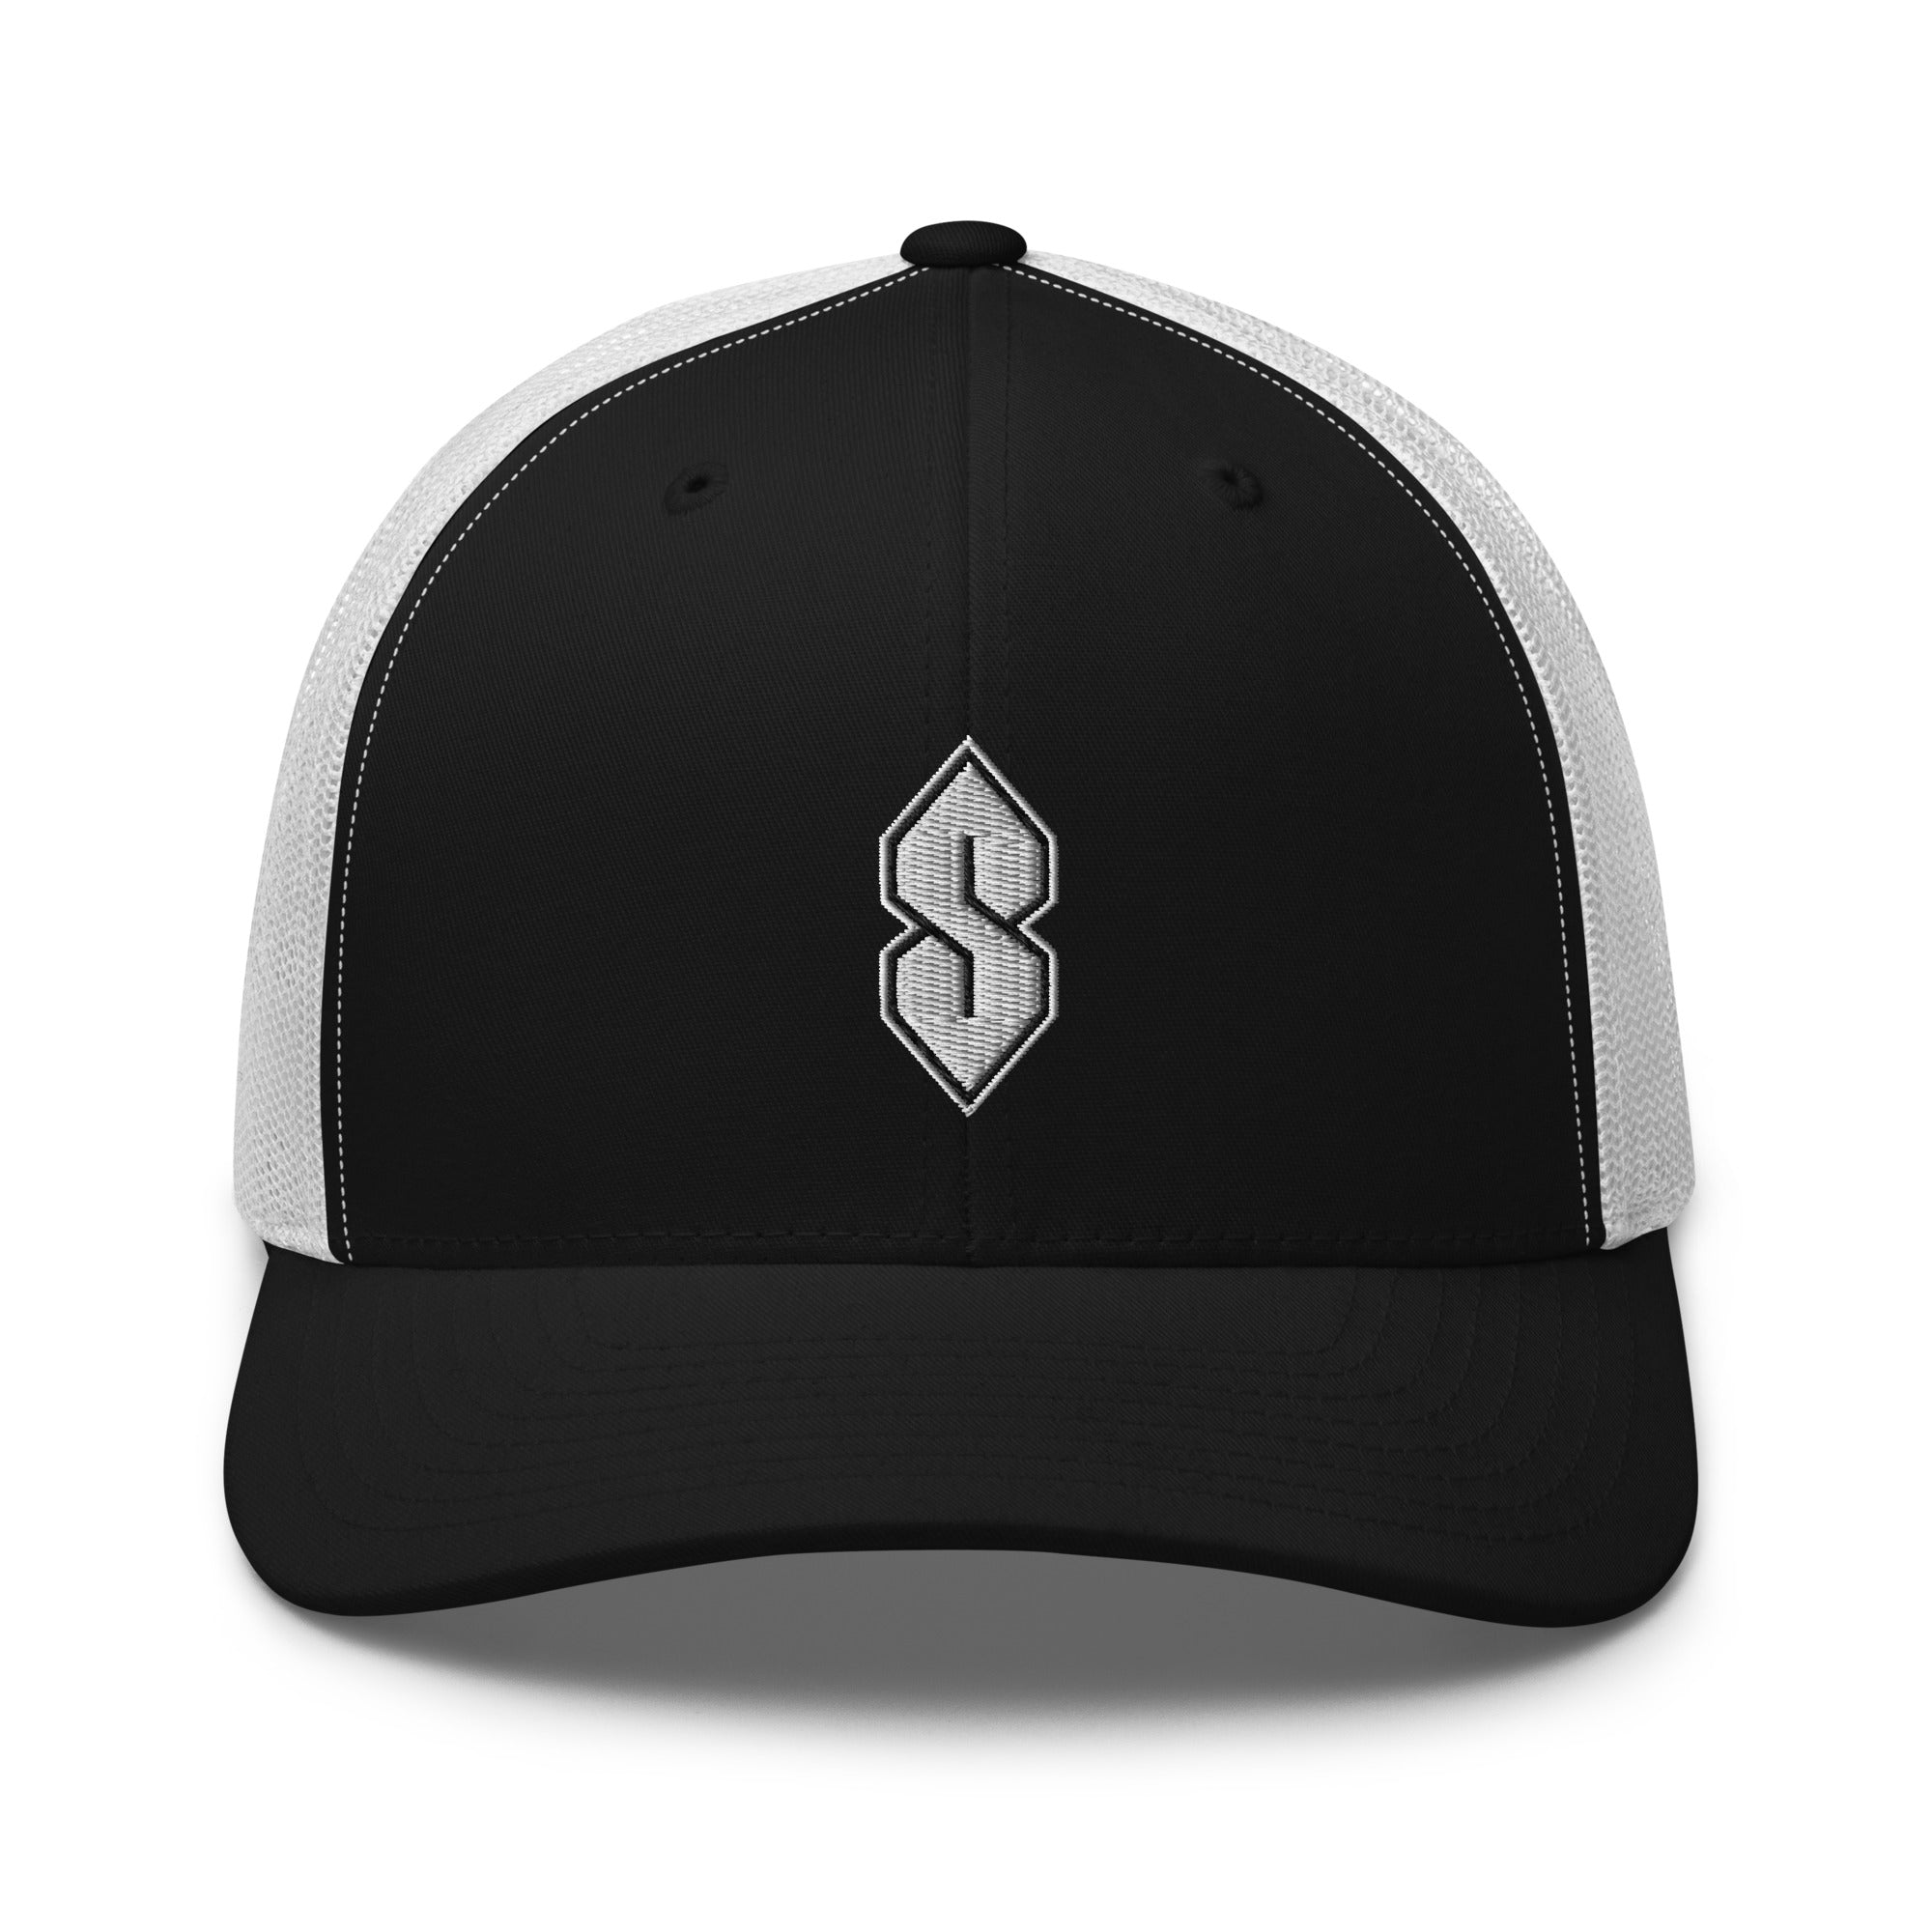 Black Outline Cool S, Graffiti S, Middle School S Embroidered Trucker Cap Snapback Hat